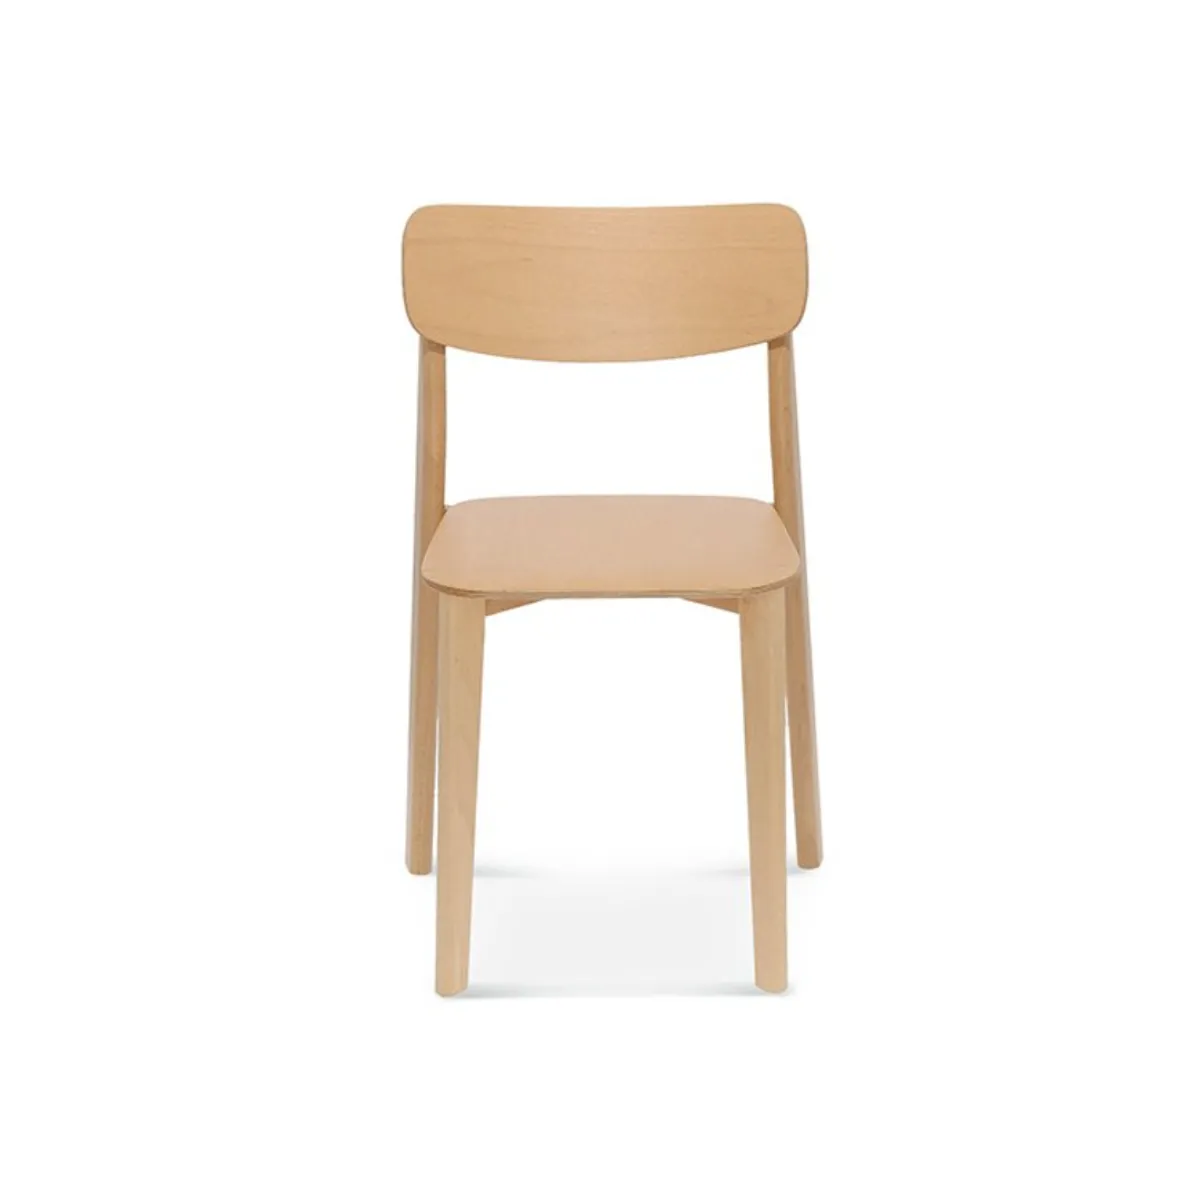 Parlour stacking side chair 3